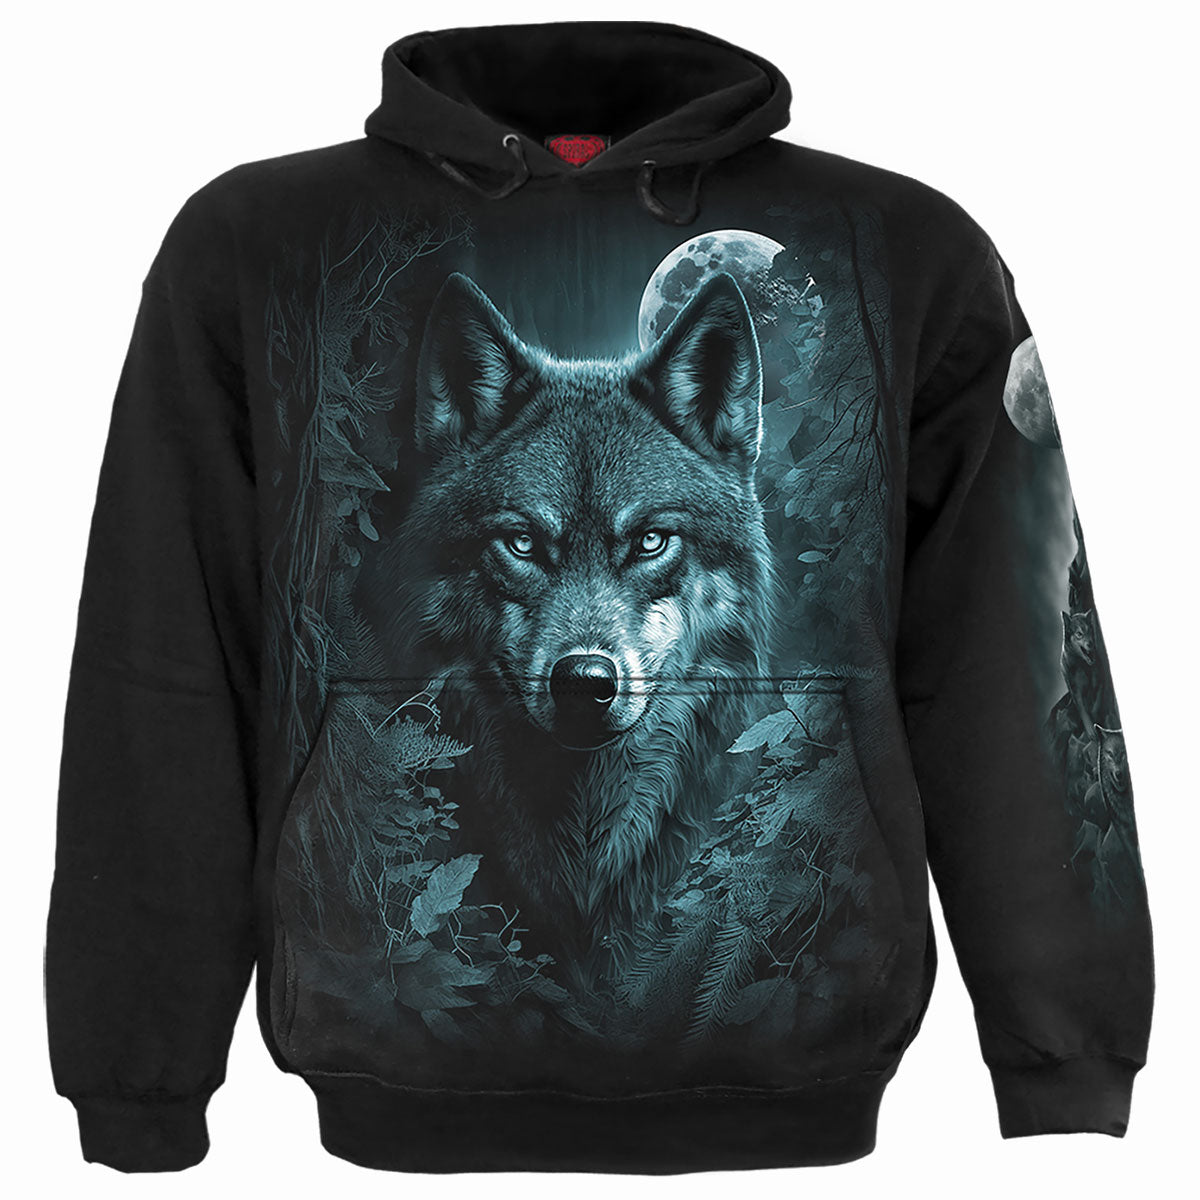 FOREST GUARDIANS - Hoody Black